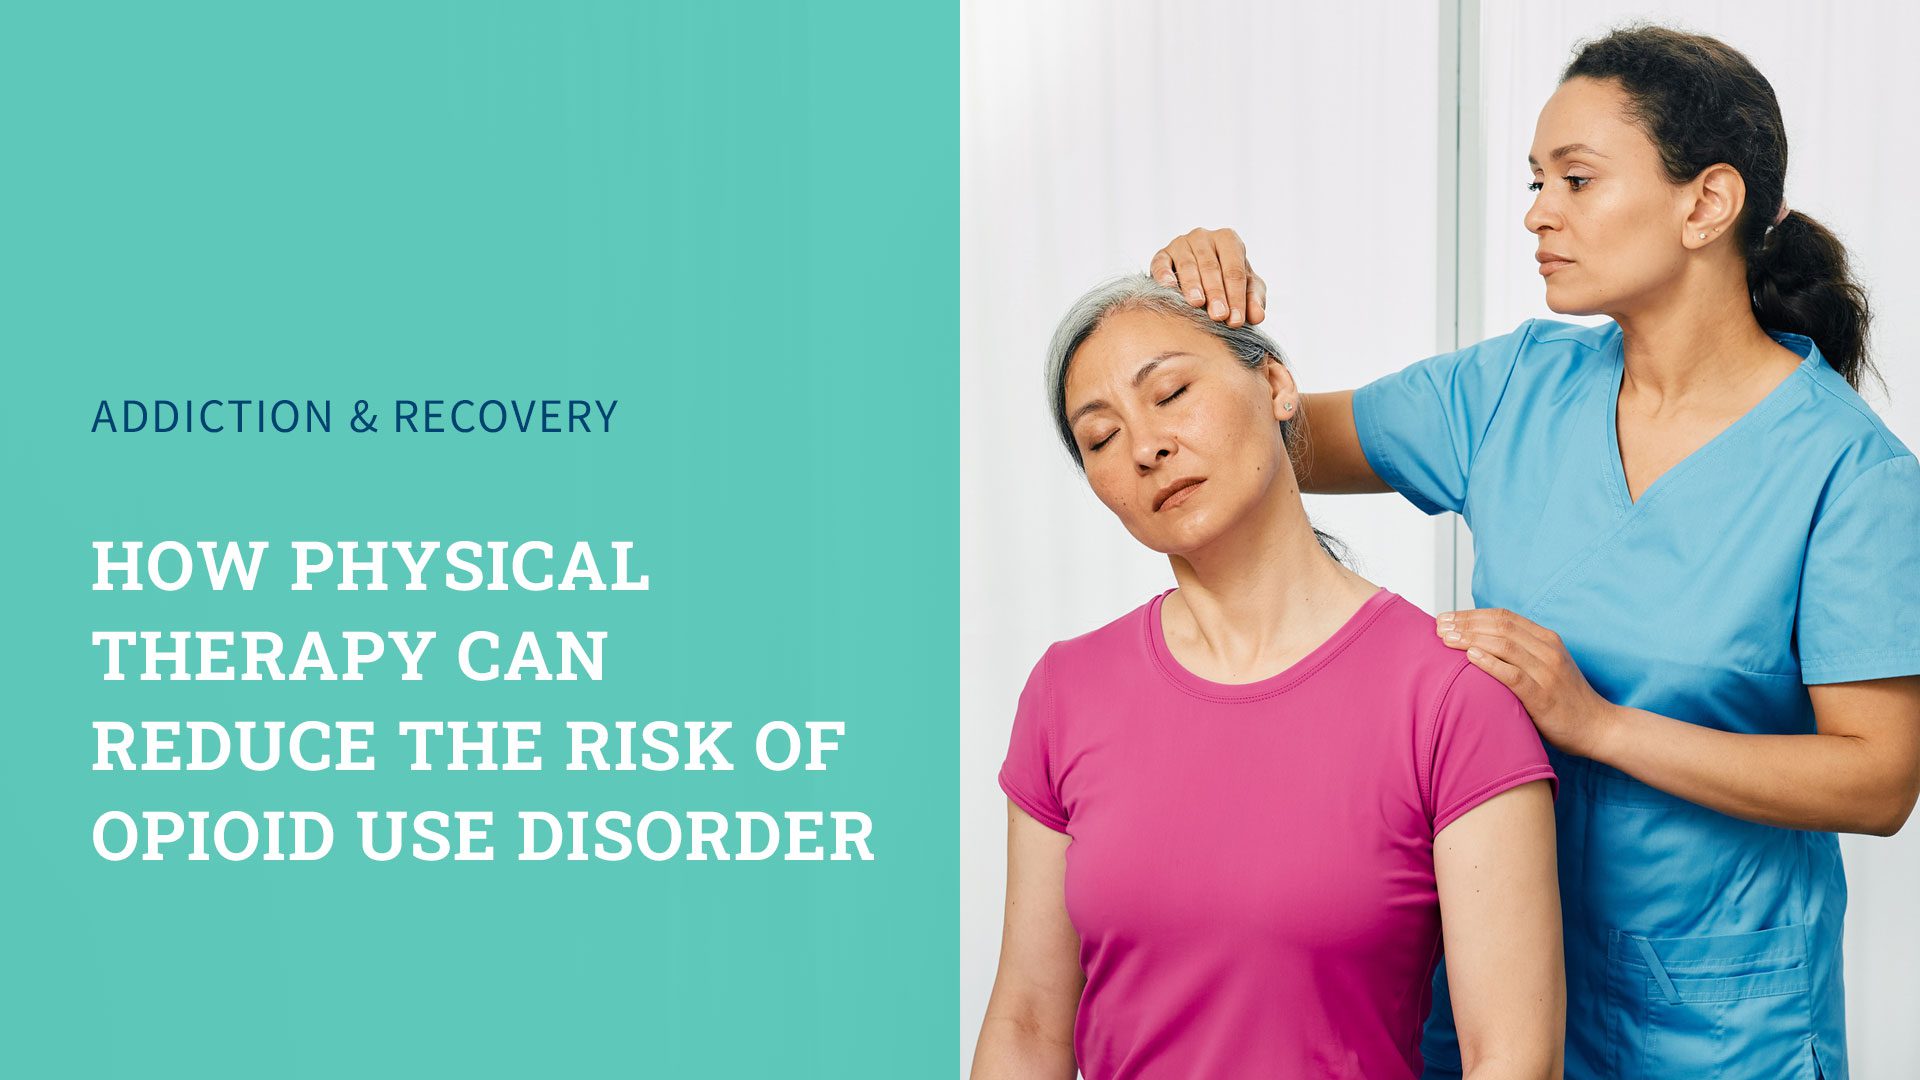 How Physical Therapy Can Reduce the Risk of Opioid Use Disorder